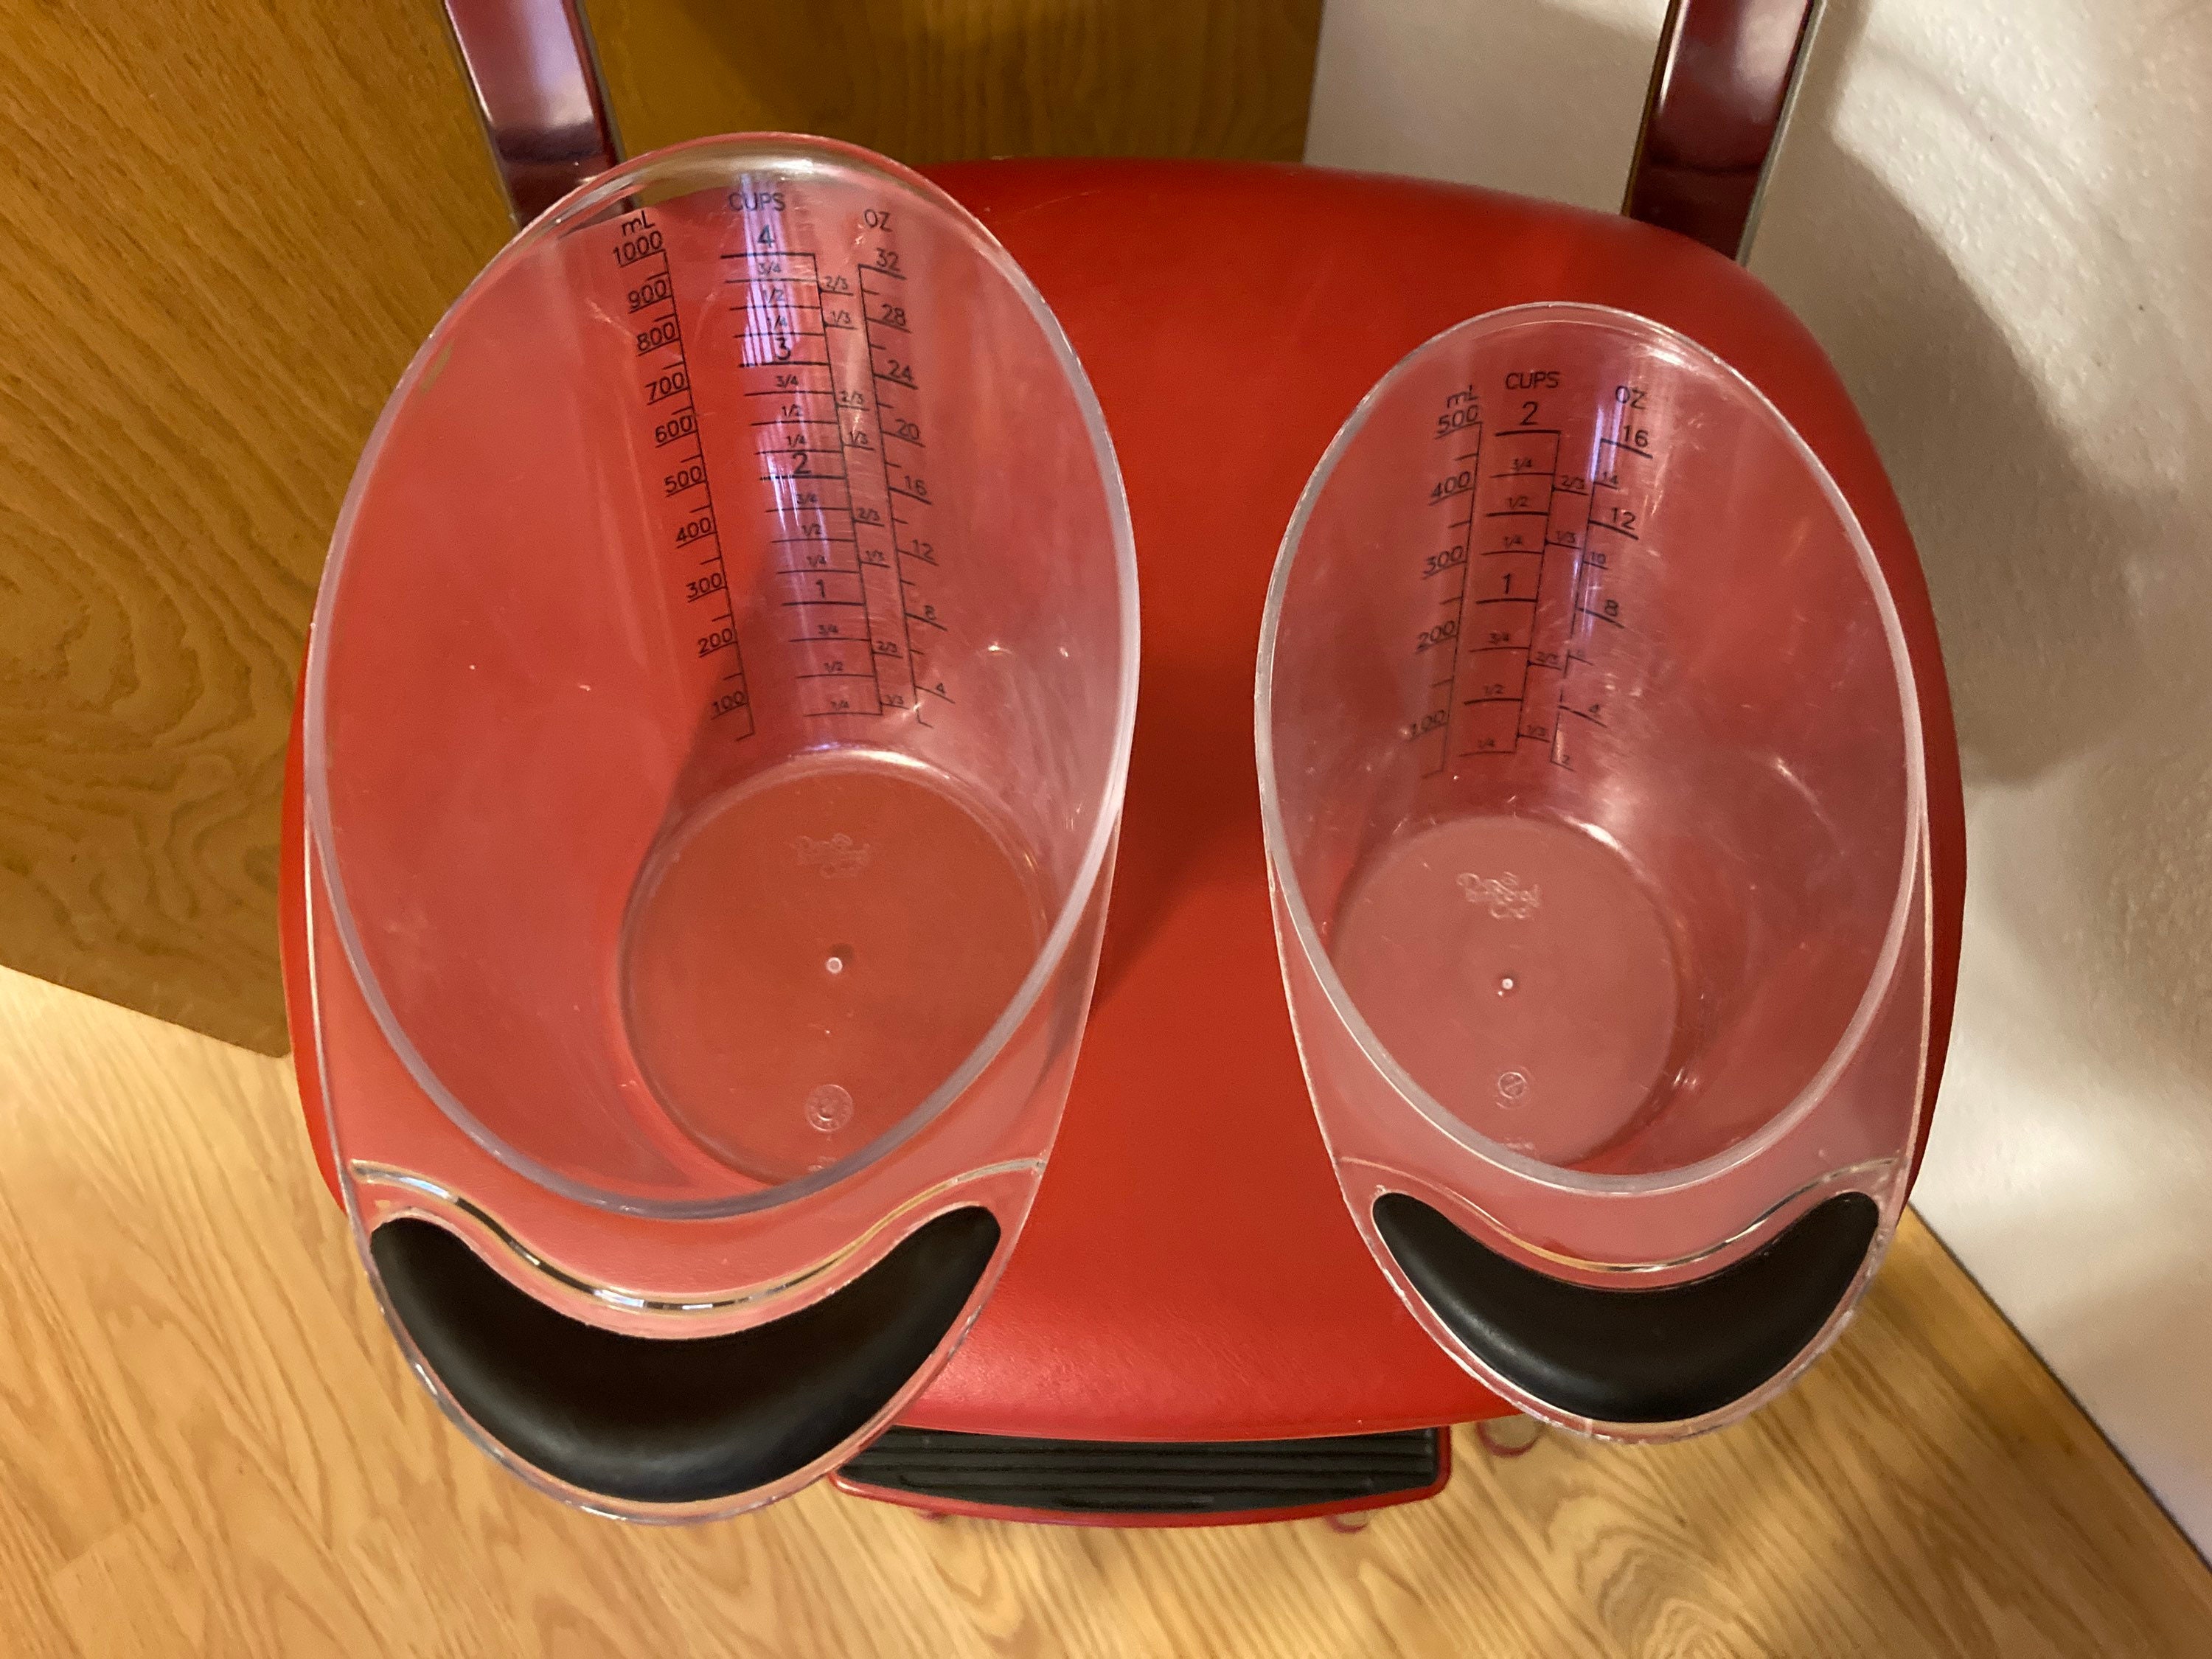 Pampered Chef EASY-READ MEASURING CUP SET set of 4